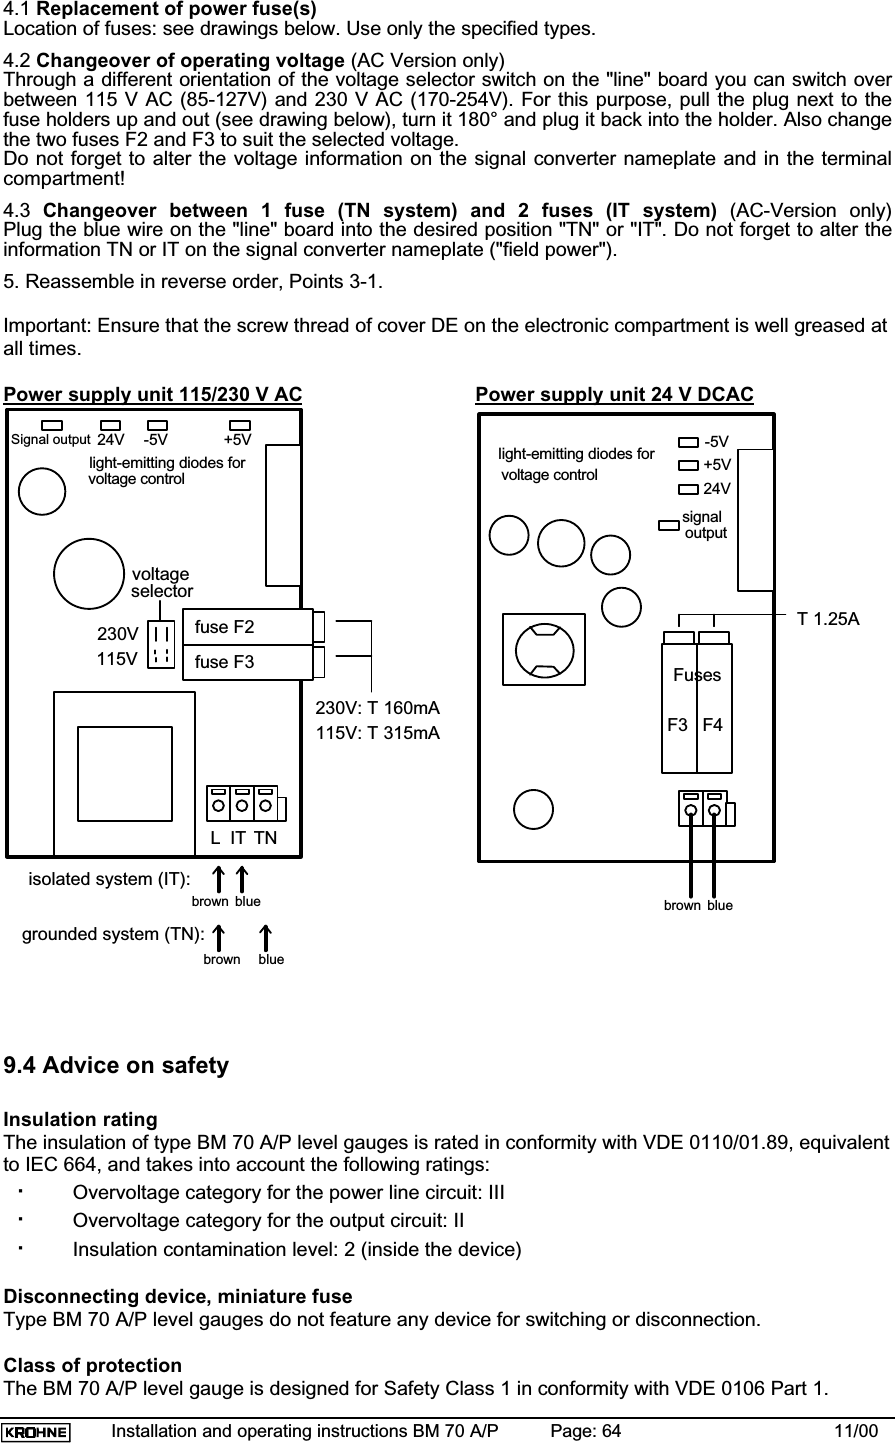 Installation and operating instructions BM 70 A/P Page: 64 11/004.1 Replacement of power fuse(s)Location of fuses: see drawings below. Use only the specified types.4.2 Changeover of operating voltage (AC Version only)Through a different orientation of the voltage selector switch on the &quot;line&quot; board you can switch overbetween 115 V AC (85-127V) and 230 V AC (170-254V). For this purpose, pull the plug next to thefuse holders up and out (see drawing below), turn it 180° and plug it back into the holder. Also changethe two fuses F2 and F3 to suit the selected voltage.Do not forget to alter the voltage information on the signal converter nameplate and in the terminalcompartment!4.3 Changeover between 1 fuse (TN system) and 2 fuses (IT system) (AC-Version only)Plug the blue wire on the &quot;line&quot; board into the desired position &quot;TN&quot; or &quot;IT&quot;. Do not forget to alter theinformation TN or IT on the signal converter nameplate (&quot;field power&quot;).5. Reassemble in reverse order, Points 3-1.Important: Ensure that the screw thread of cover DE on the electronic compartment is well greased atall times.Power supply unit 115/230 V AC Power supply unit 24 V DCACLITTNfuse F2fuse F3230V115Vvoltageselectorisolated system (IT):grounded system (TN):brown bluebrown blue230V: T 160mA115V: T 315mAlight-emitting diodes forvoltage control24V -5V +5VSignal outputbrown blueF3 F4FusesT 1.25A-5V+5V24Vsignaloutputlight-emitting diodes forvoltage control9.4 Advice on safetyInsulation ratingThe insulation of type BM 70 A/P level gauges is rated in conformity with VDE 0110/01.89, equivalentto IEC 664, and takes into account the following ratings:·Overvoltage category for the power line circuit: III·Overvoltage category for the output circuit: II·Insulation contamination level: 2 (inside the device)Disconnecting device, miniature fuseType BM 70 A/P level gauges do not feature any device for switching or disconnection.Class of protectionThe BM 70 A/P level gauge is designed for Safety Class 1 in conformity with VDE 0106 Part 1.